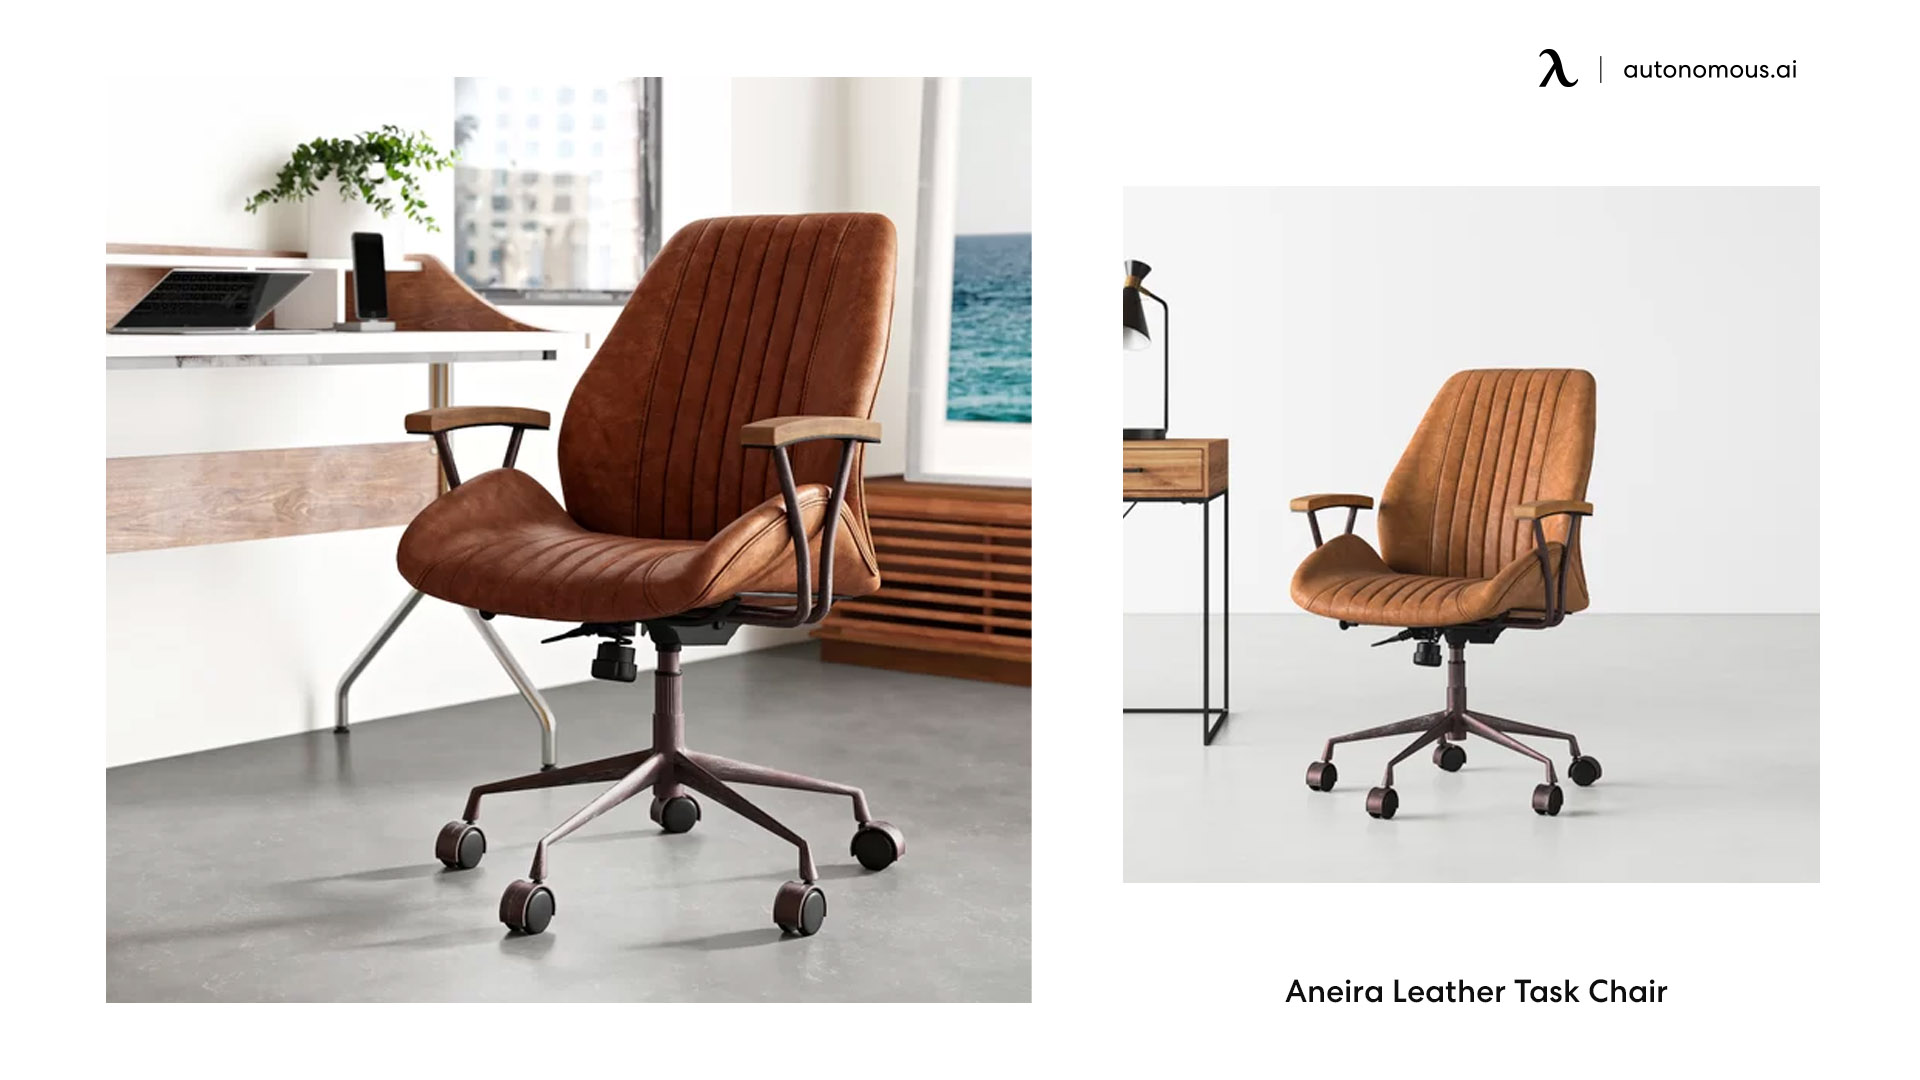 Aneira Leather Task Chair